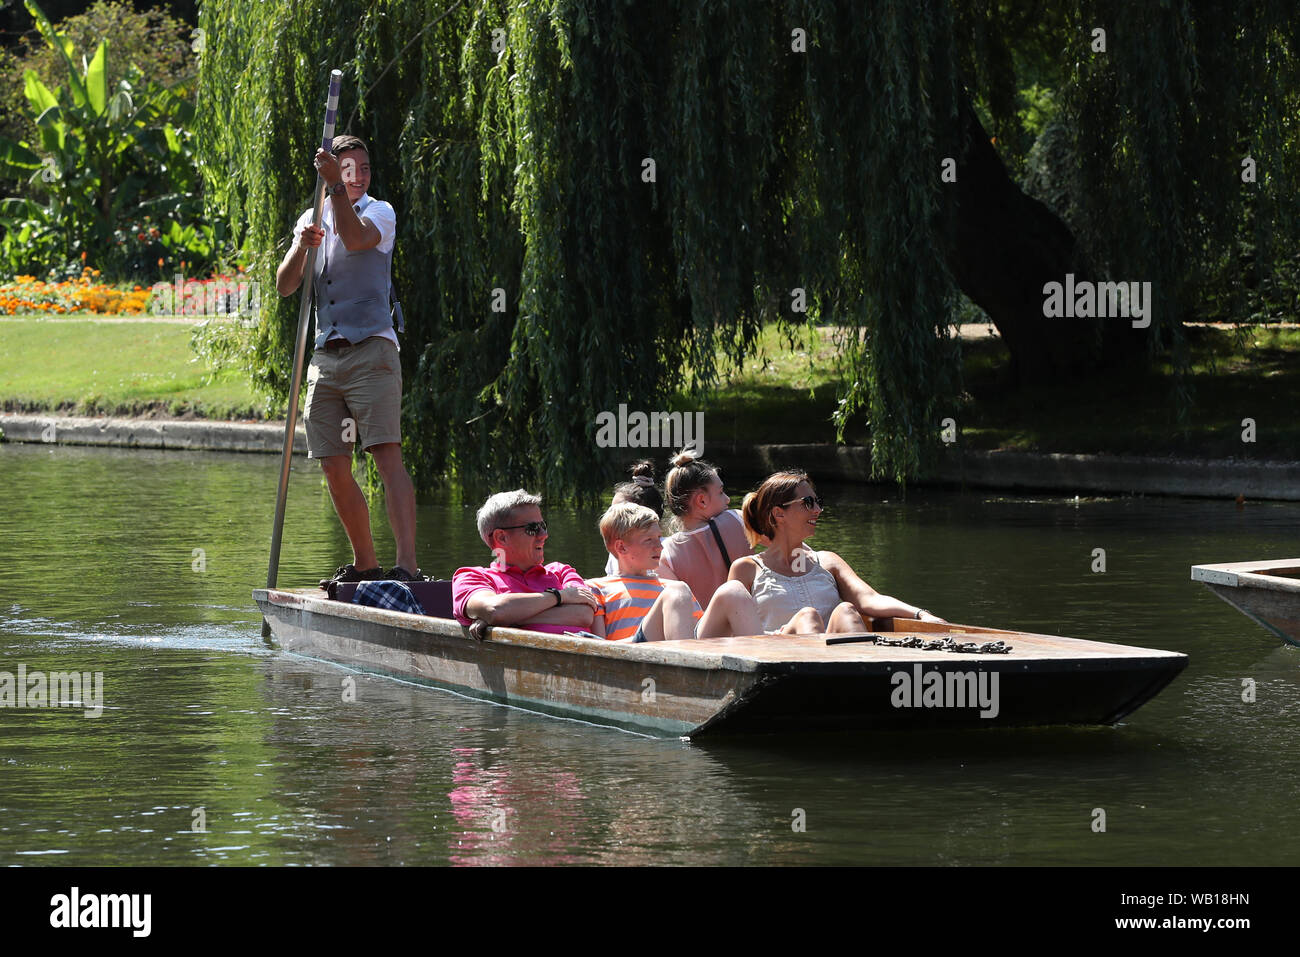 Cambridge, UK. 23 August 2019. Tourist enjoy a punt ride along the river Cam in Cambridge, as temperatures are set to hit 30 degrees over the weekend. Stock Photo